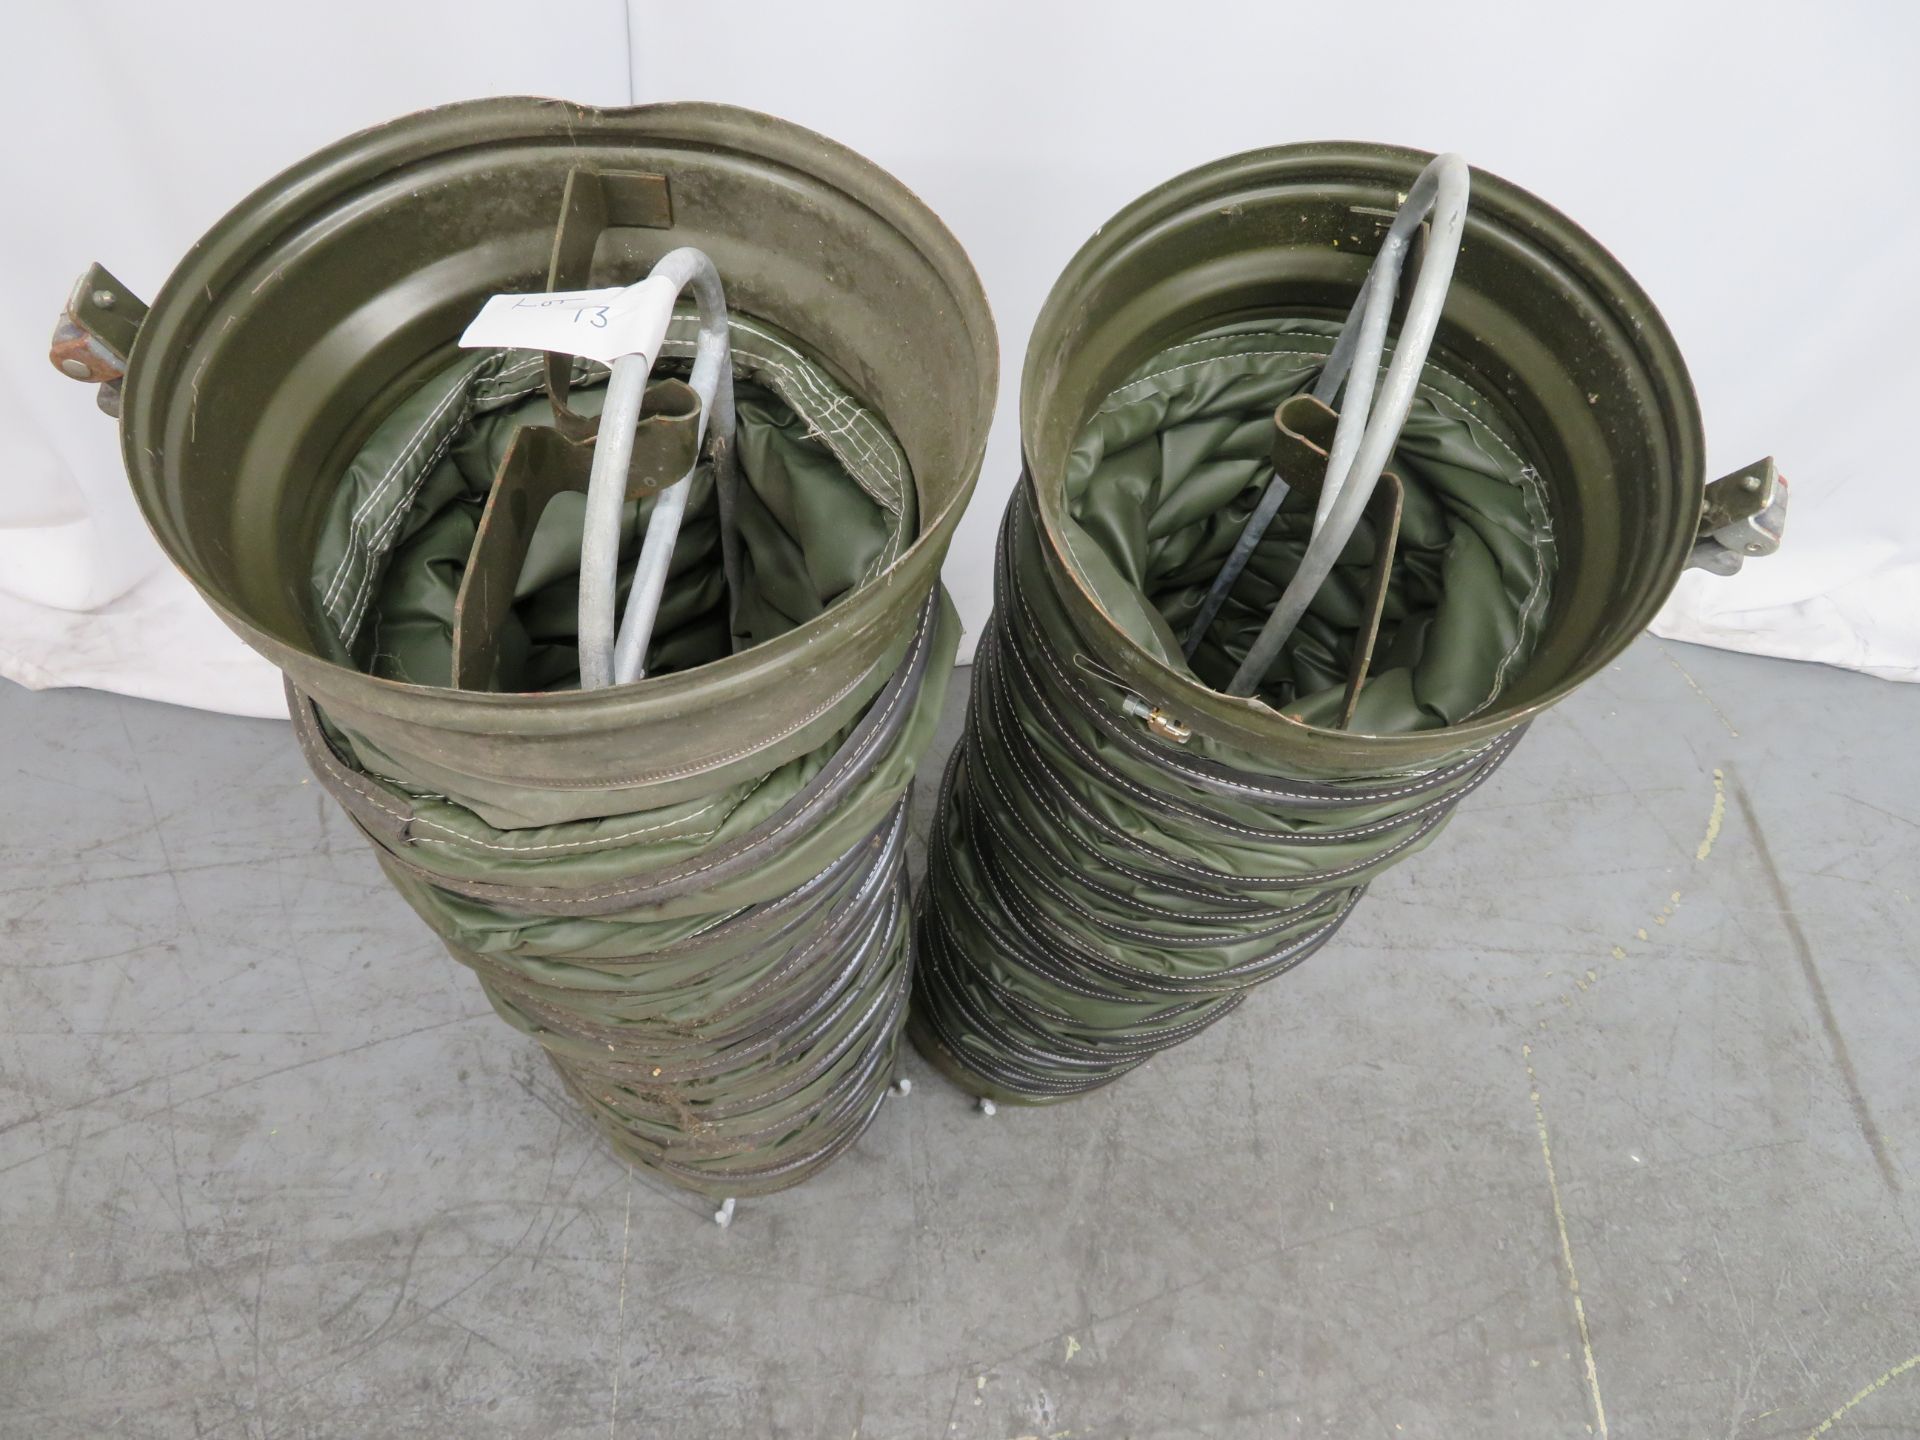 2x Dantherm VA-M 40 Flexible Ducting. Length Approx 3m. - Image 3 of 3